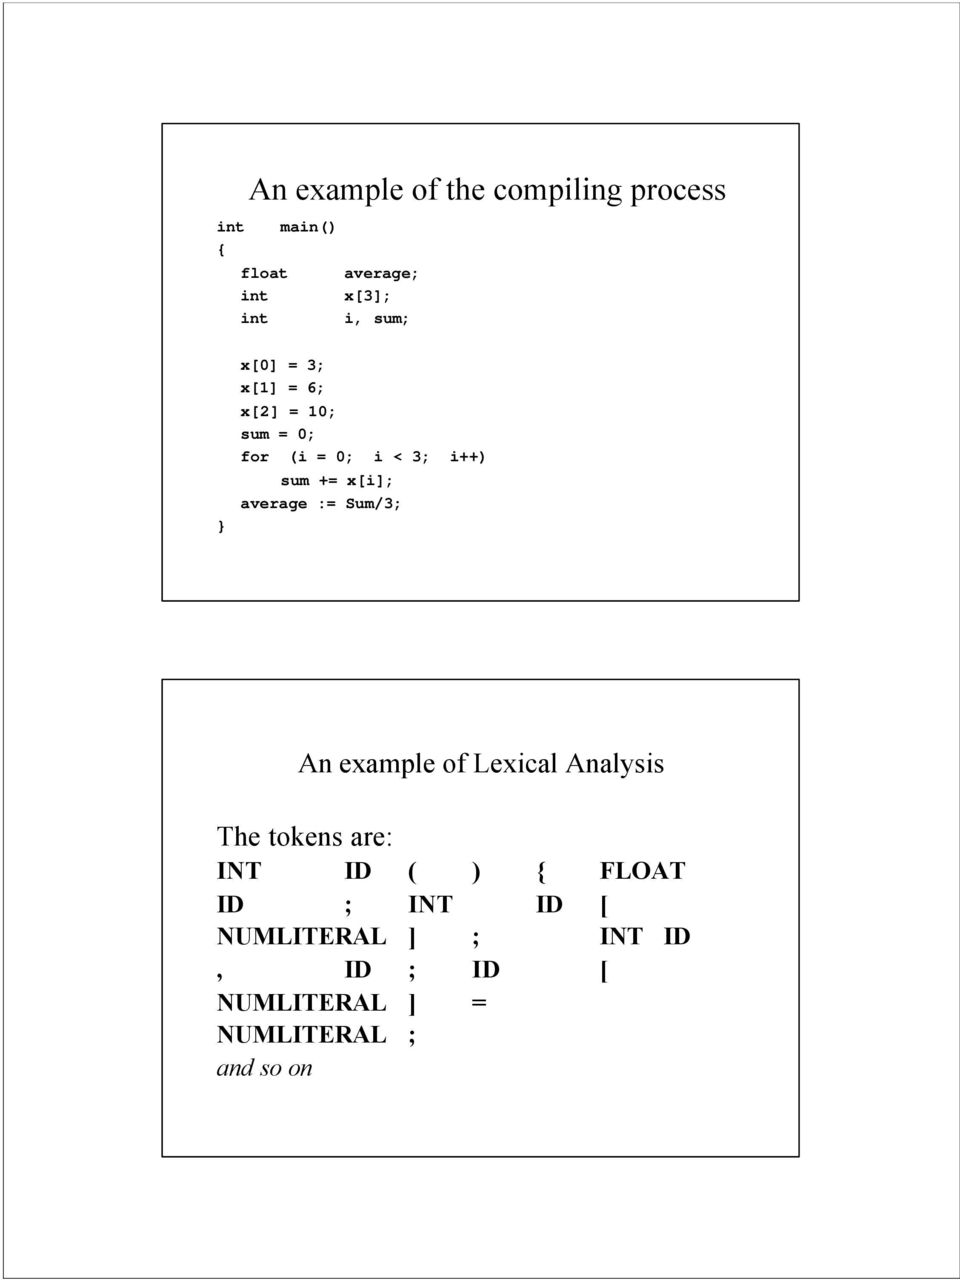 average := Sum/3; An example of Lexical Analysis The tokens are: INT ID ( ) {